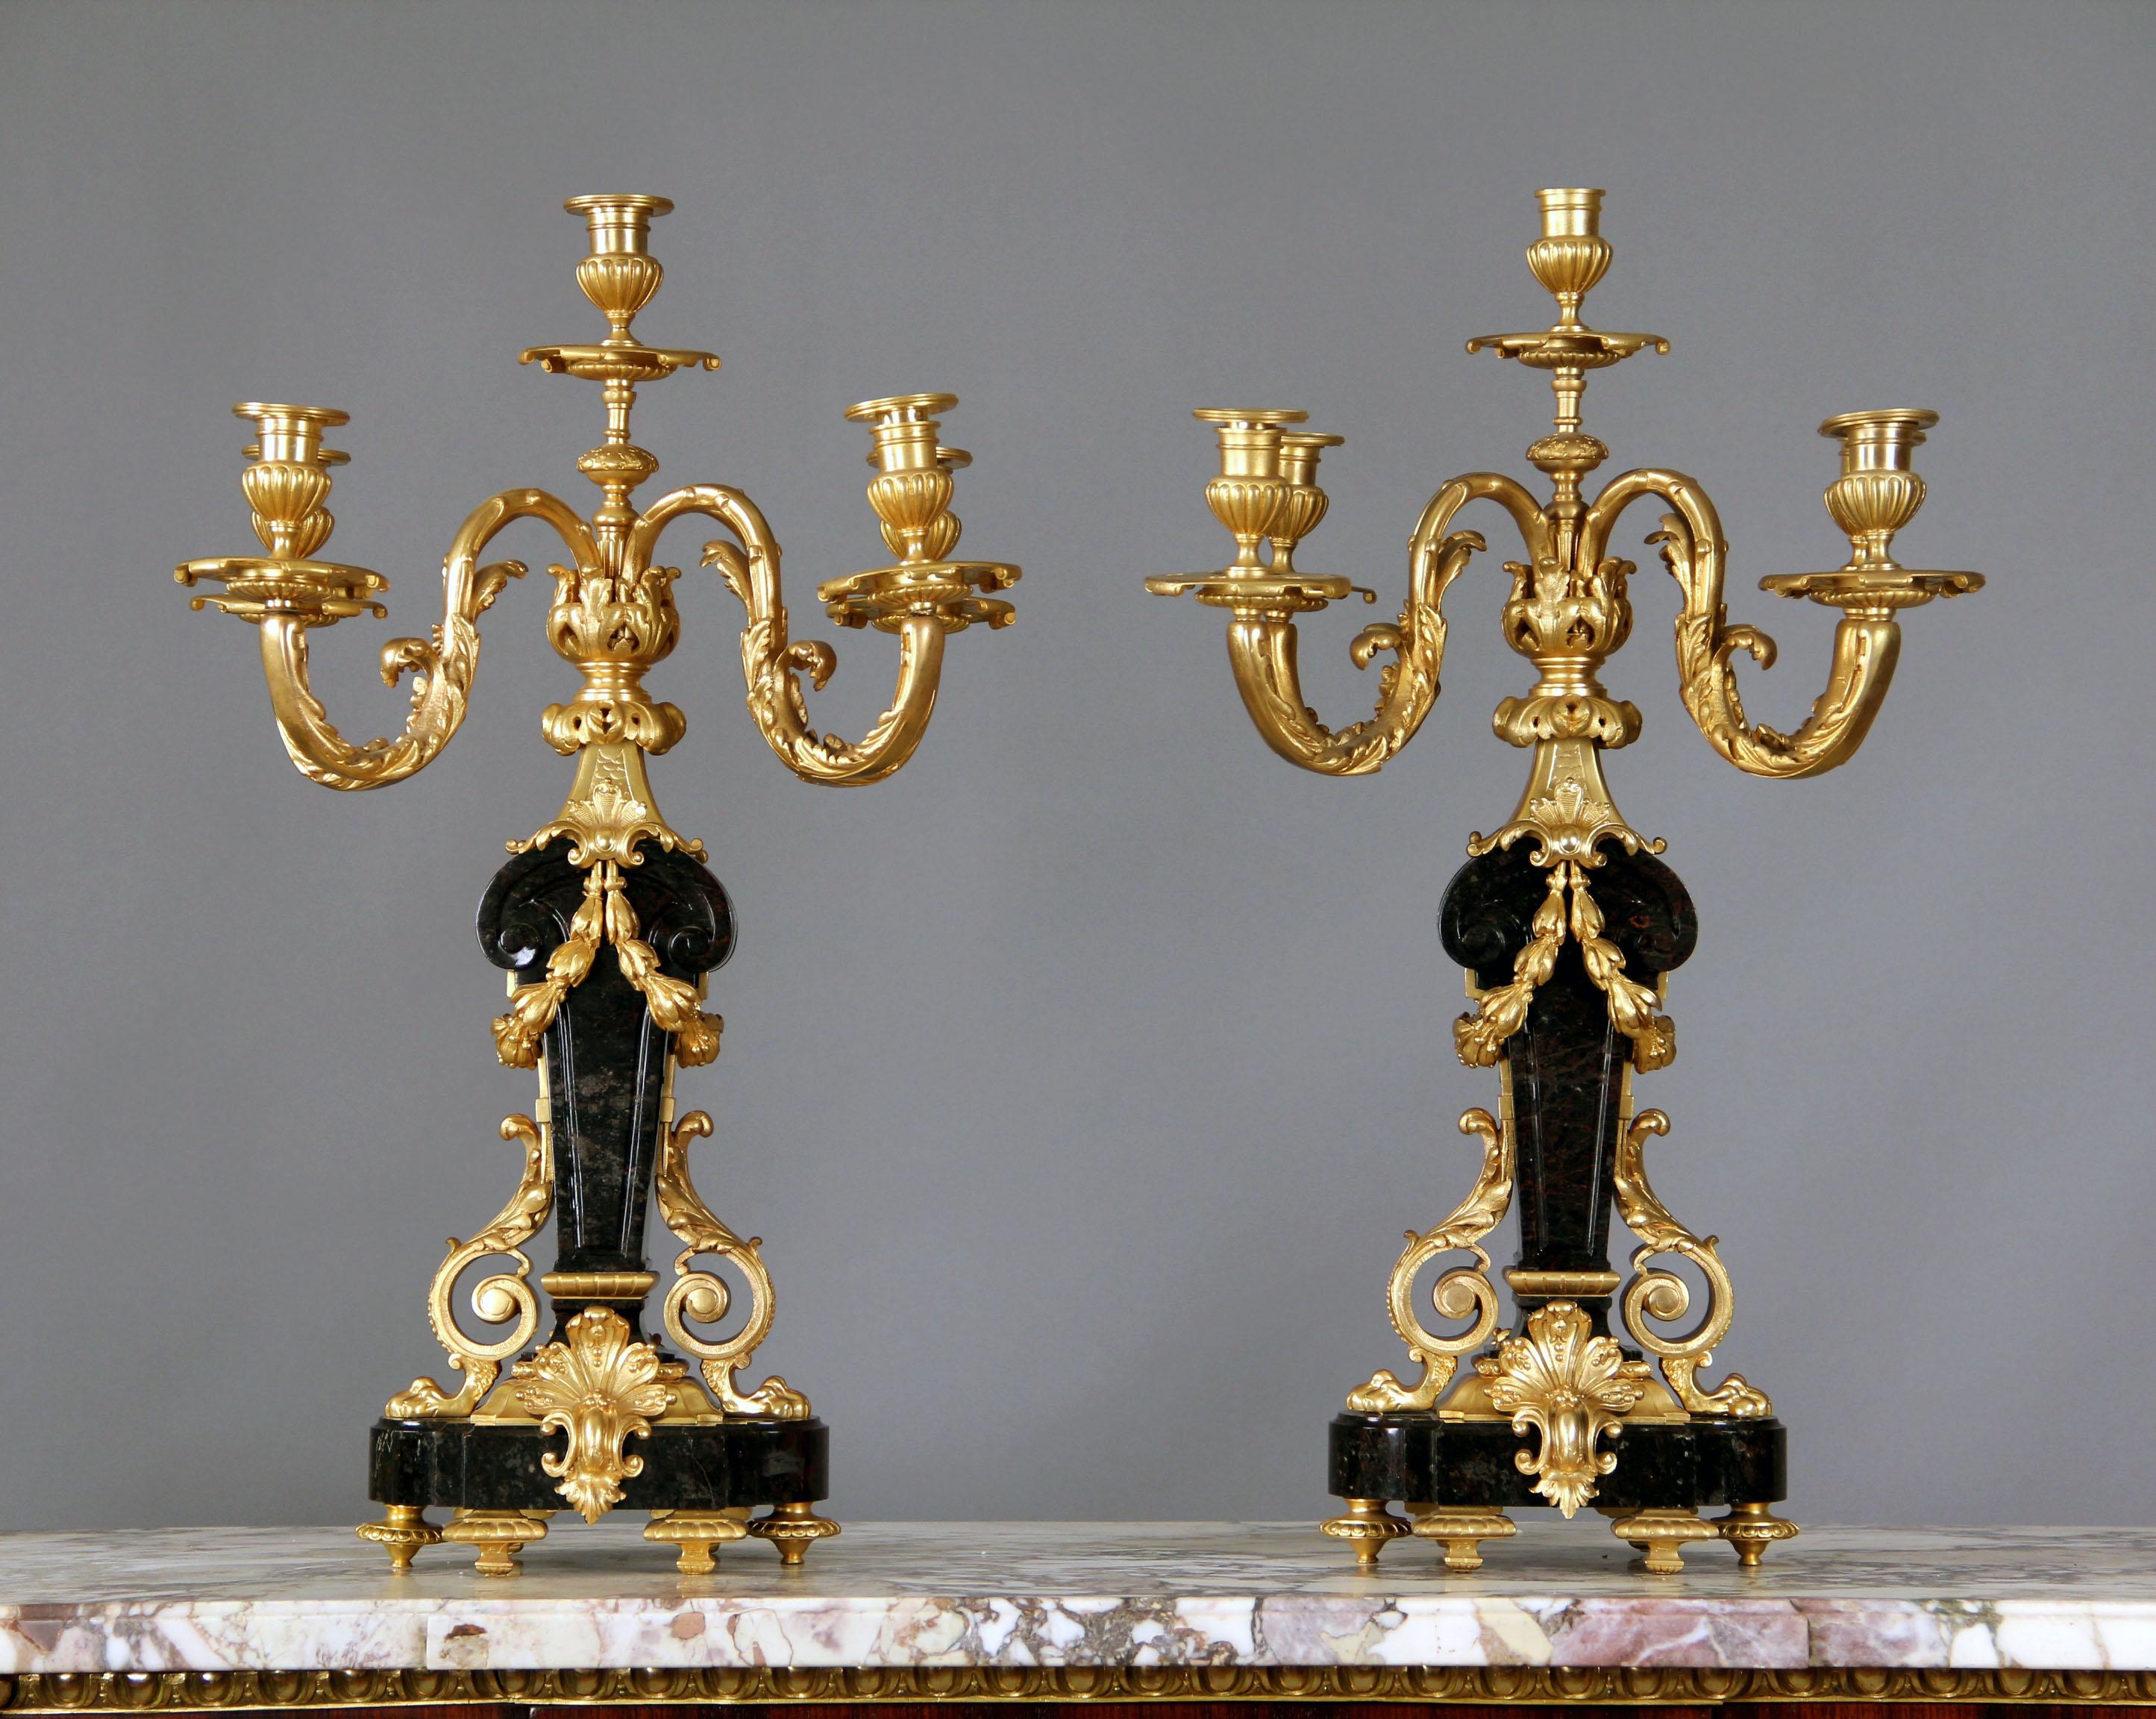 A fine pair of late 19th century gilt bronze and marble five-light candelabra.

Bronze-mounted black Belgium marble with four foliate branches about a central stem.